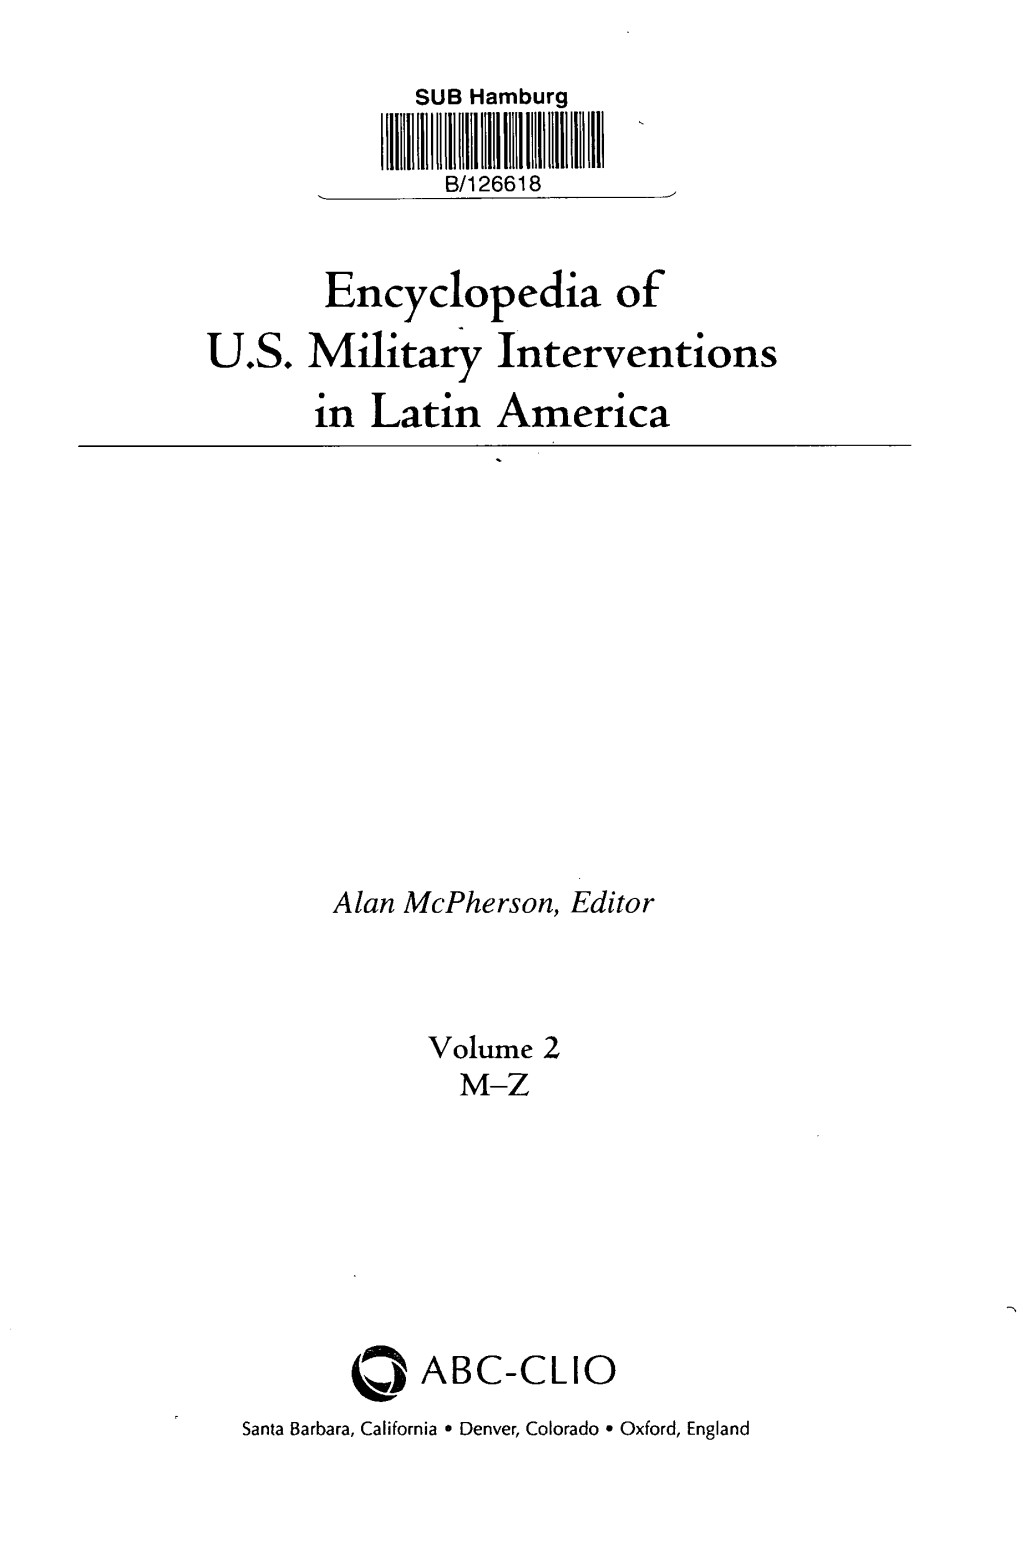 Encyclopedia of U.S. Military Interventions in Latin America